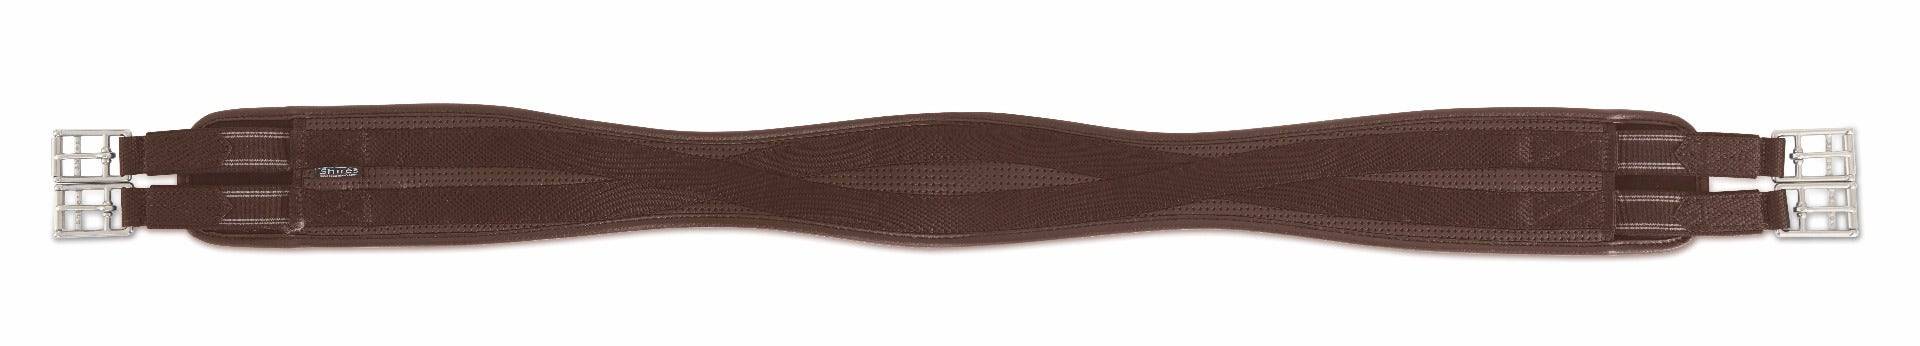 Shires Fleece Lined Contour Girth With Elastic Black or Brown 